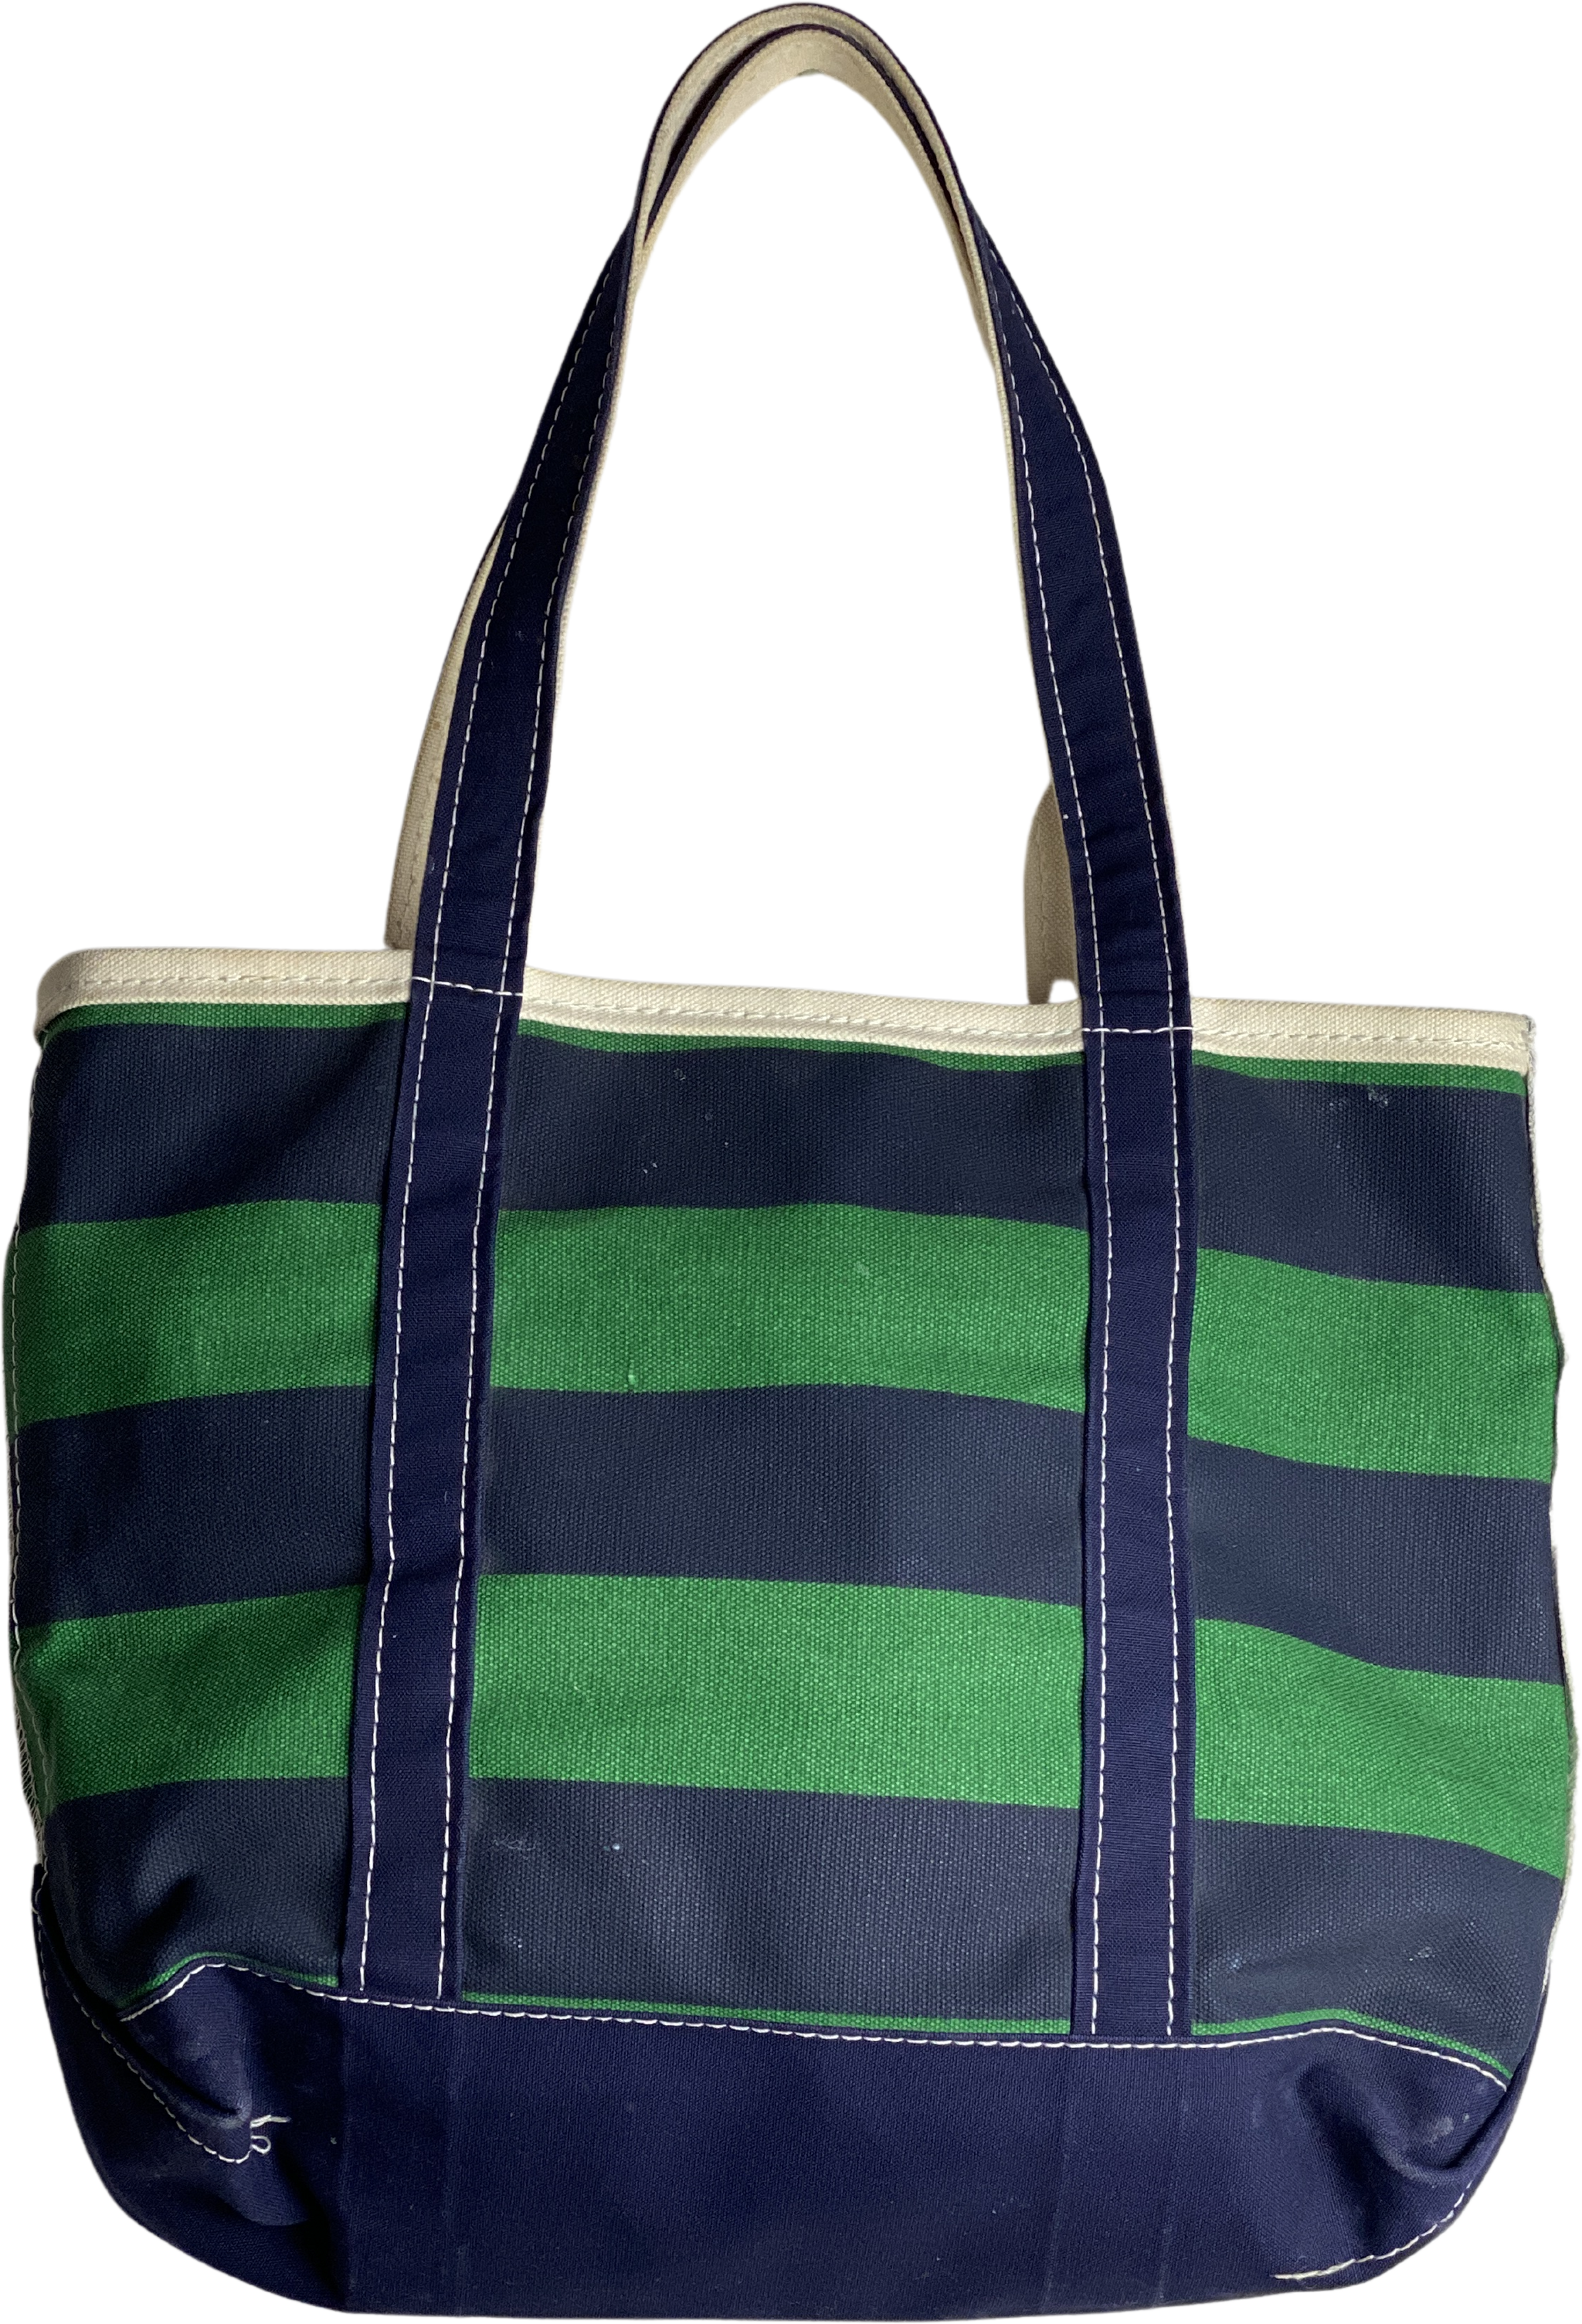 Vintage 80s/90s Navy Blue Green Striped Boat And Tote Bag By L.L. Bean